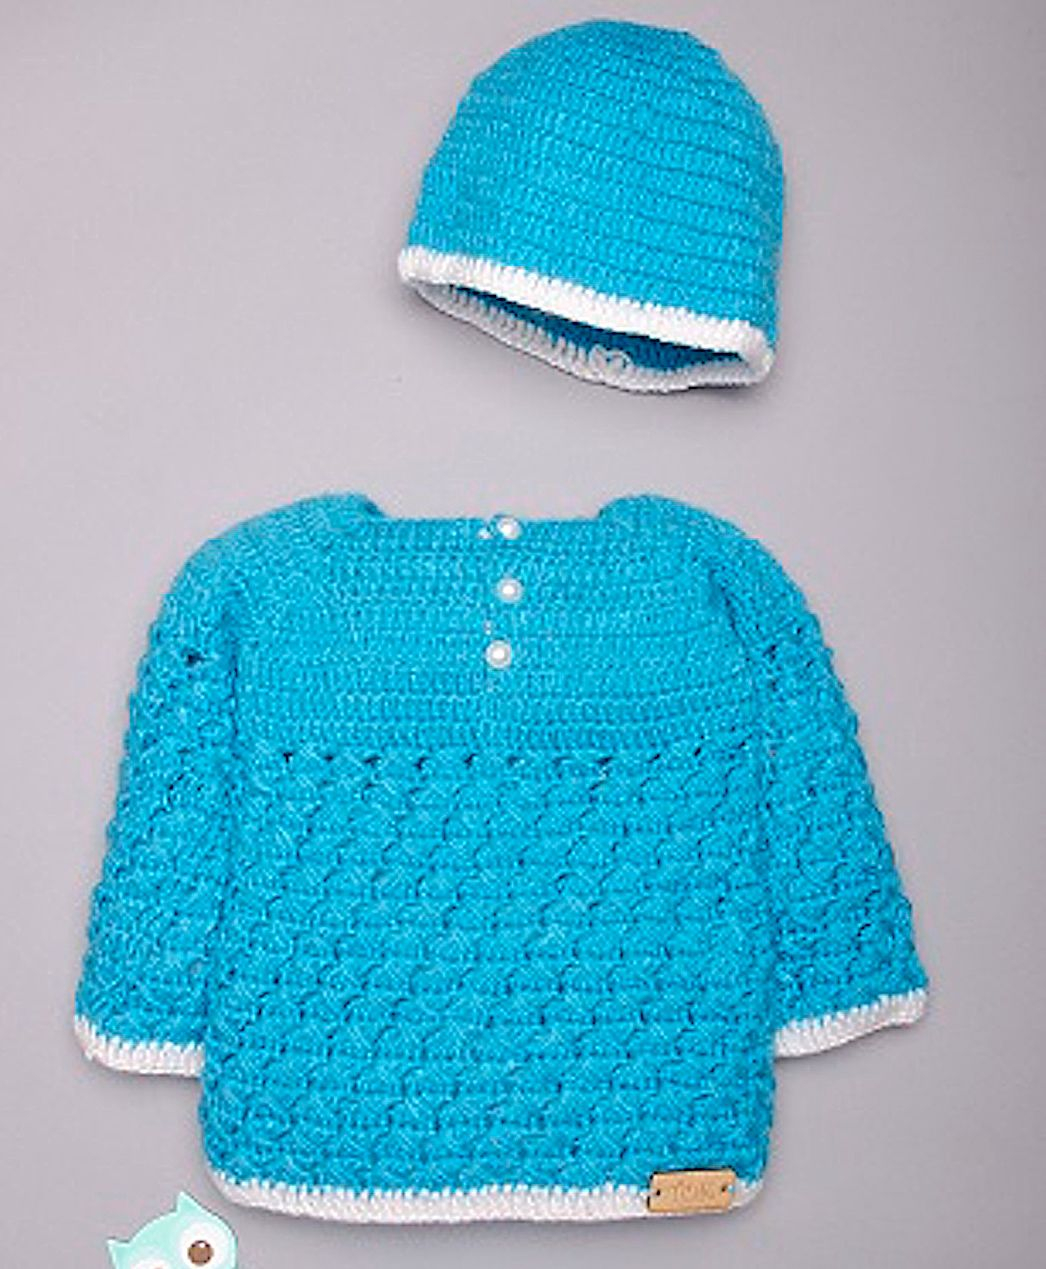 Knit Zig Zag Pattern Buy The Original Knit Zig Zag Pattern Crochet Full Sleeves Sweater With Cap Blue For Girls 12 24 Months Online In India Shop At Firstcry